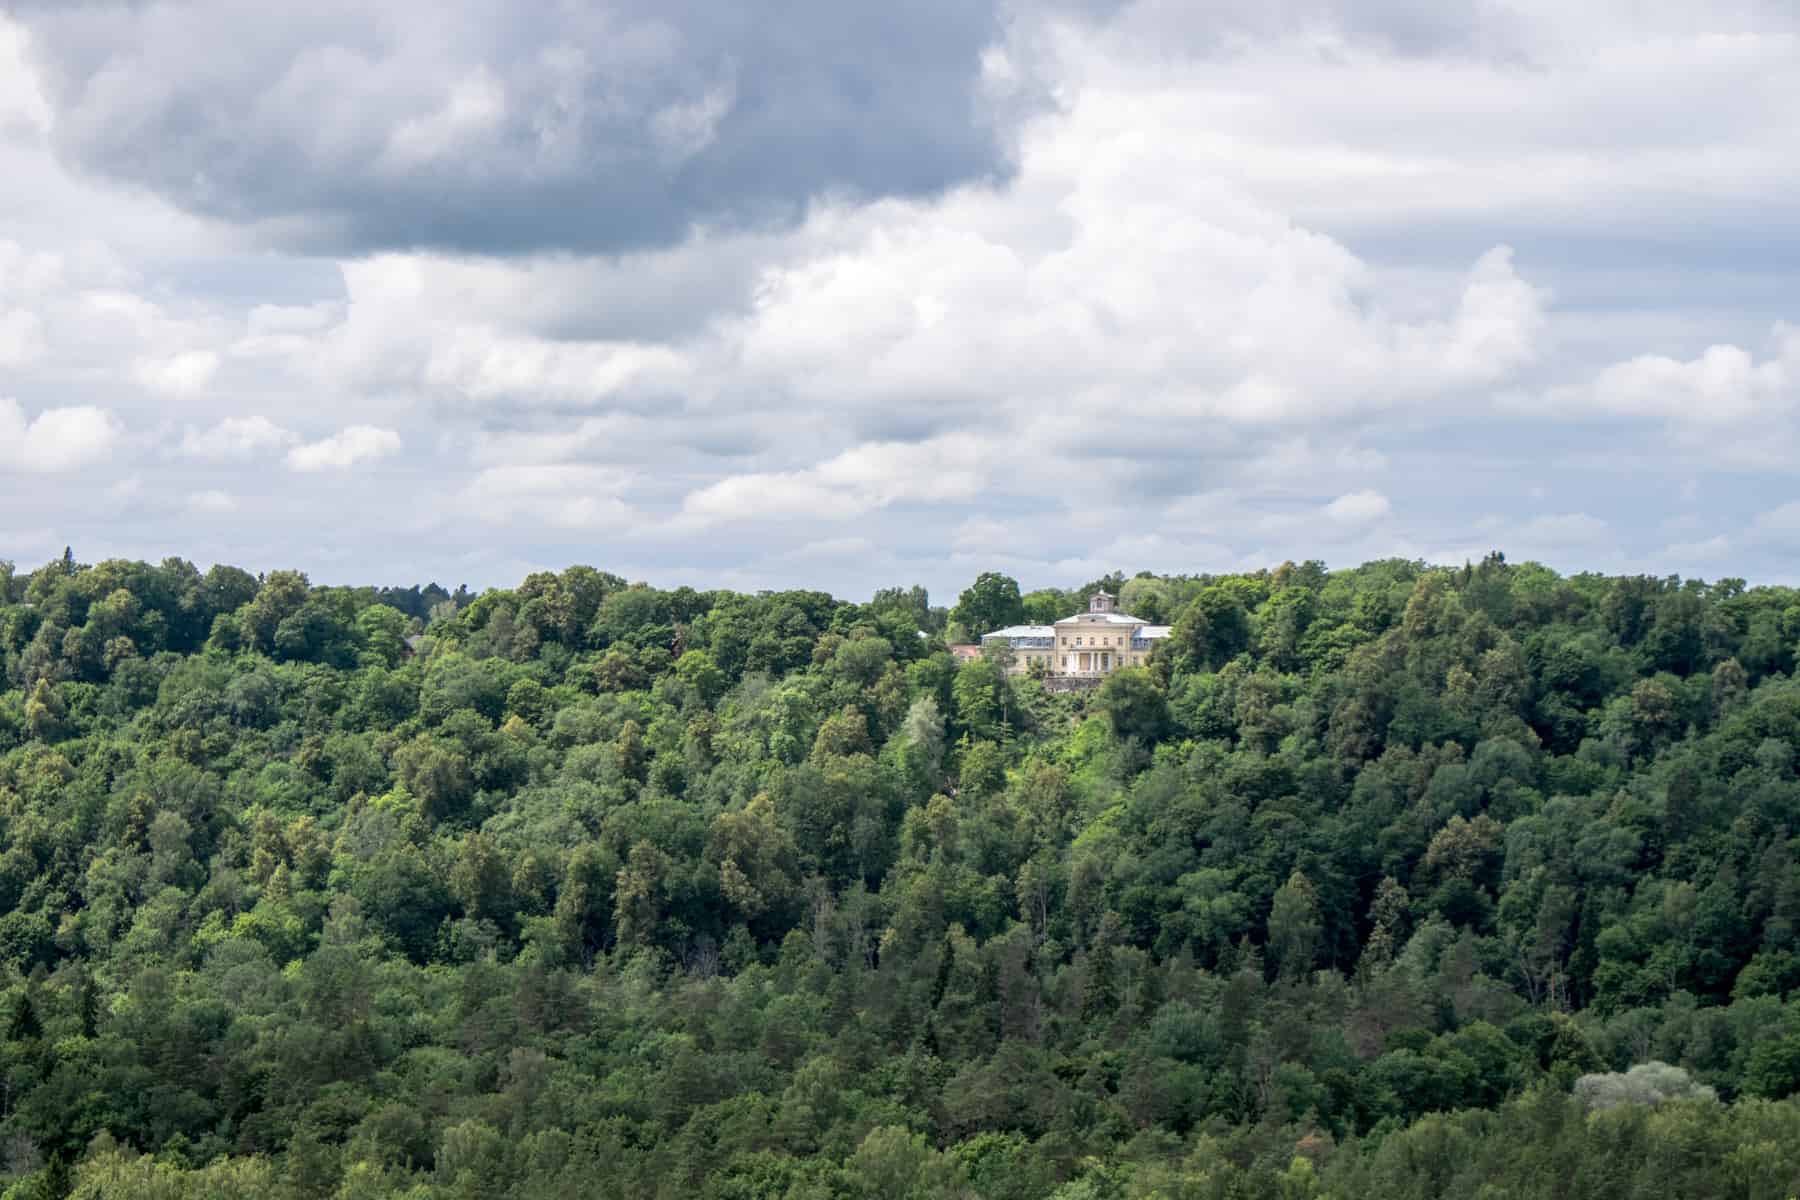 A yellow manor house pokes through a huge mass of green busy trees, under a grey-blue sky